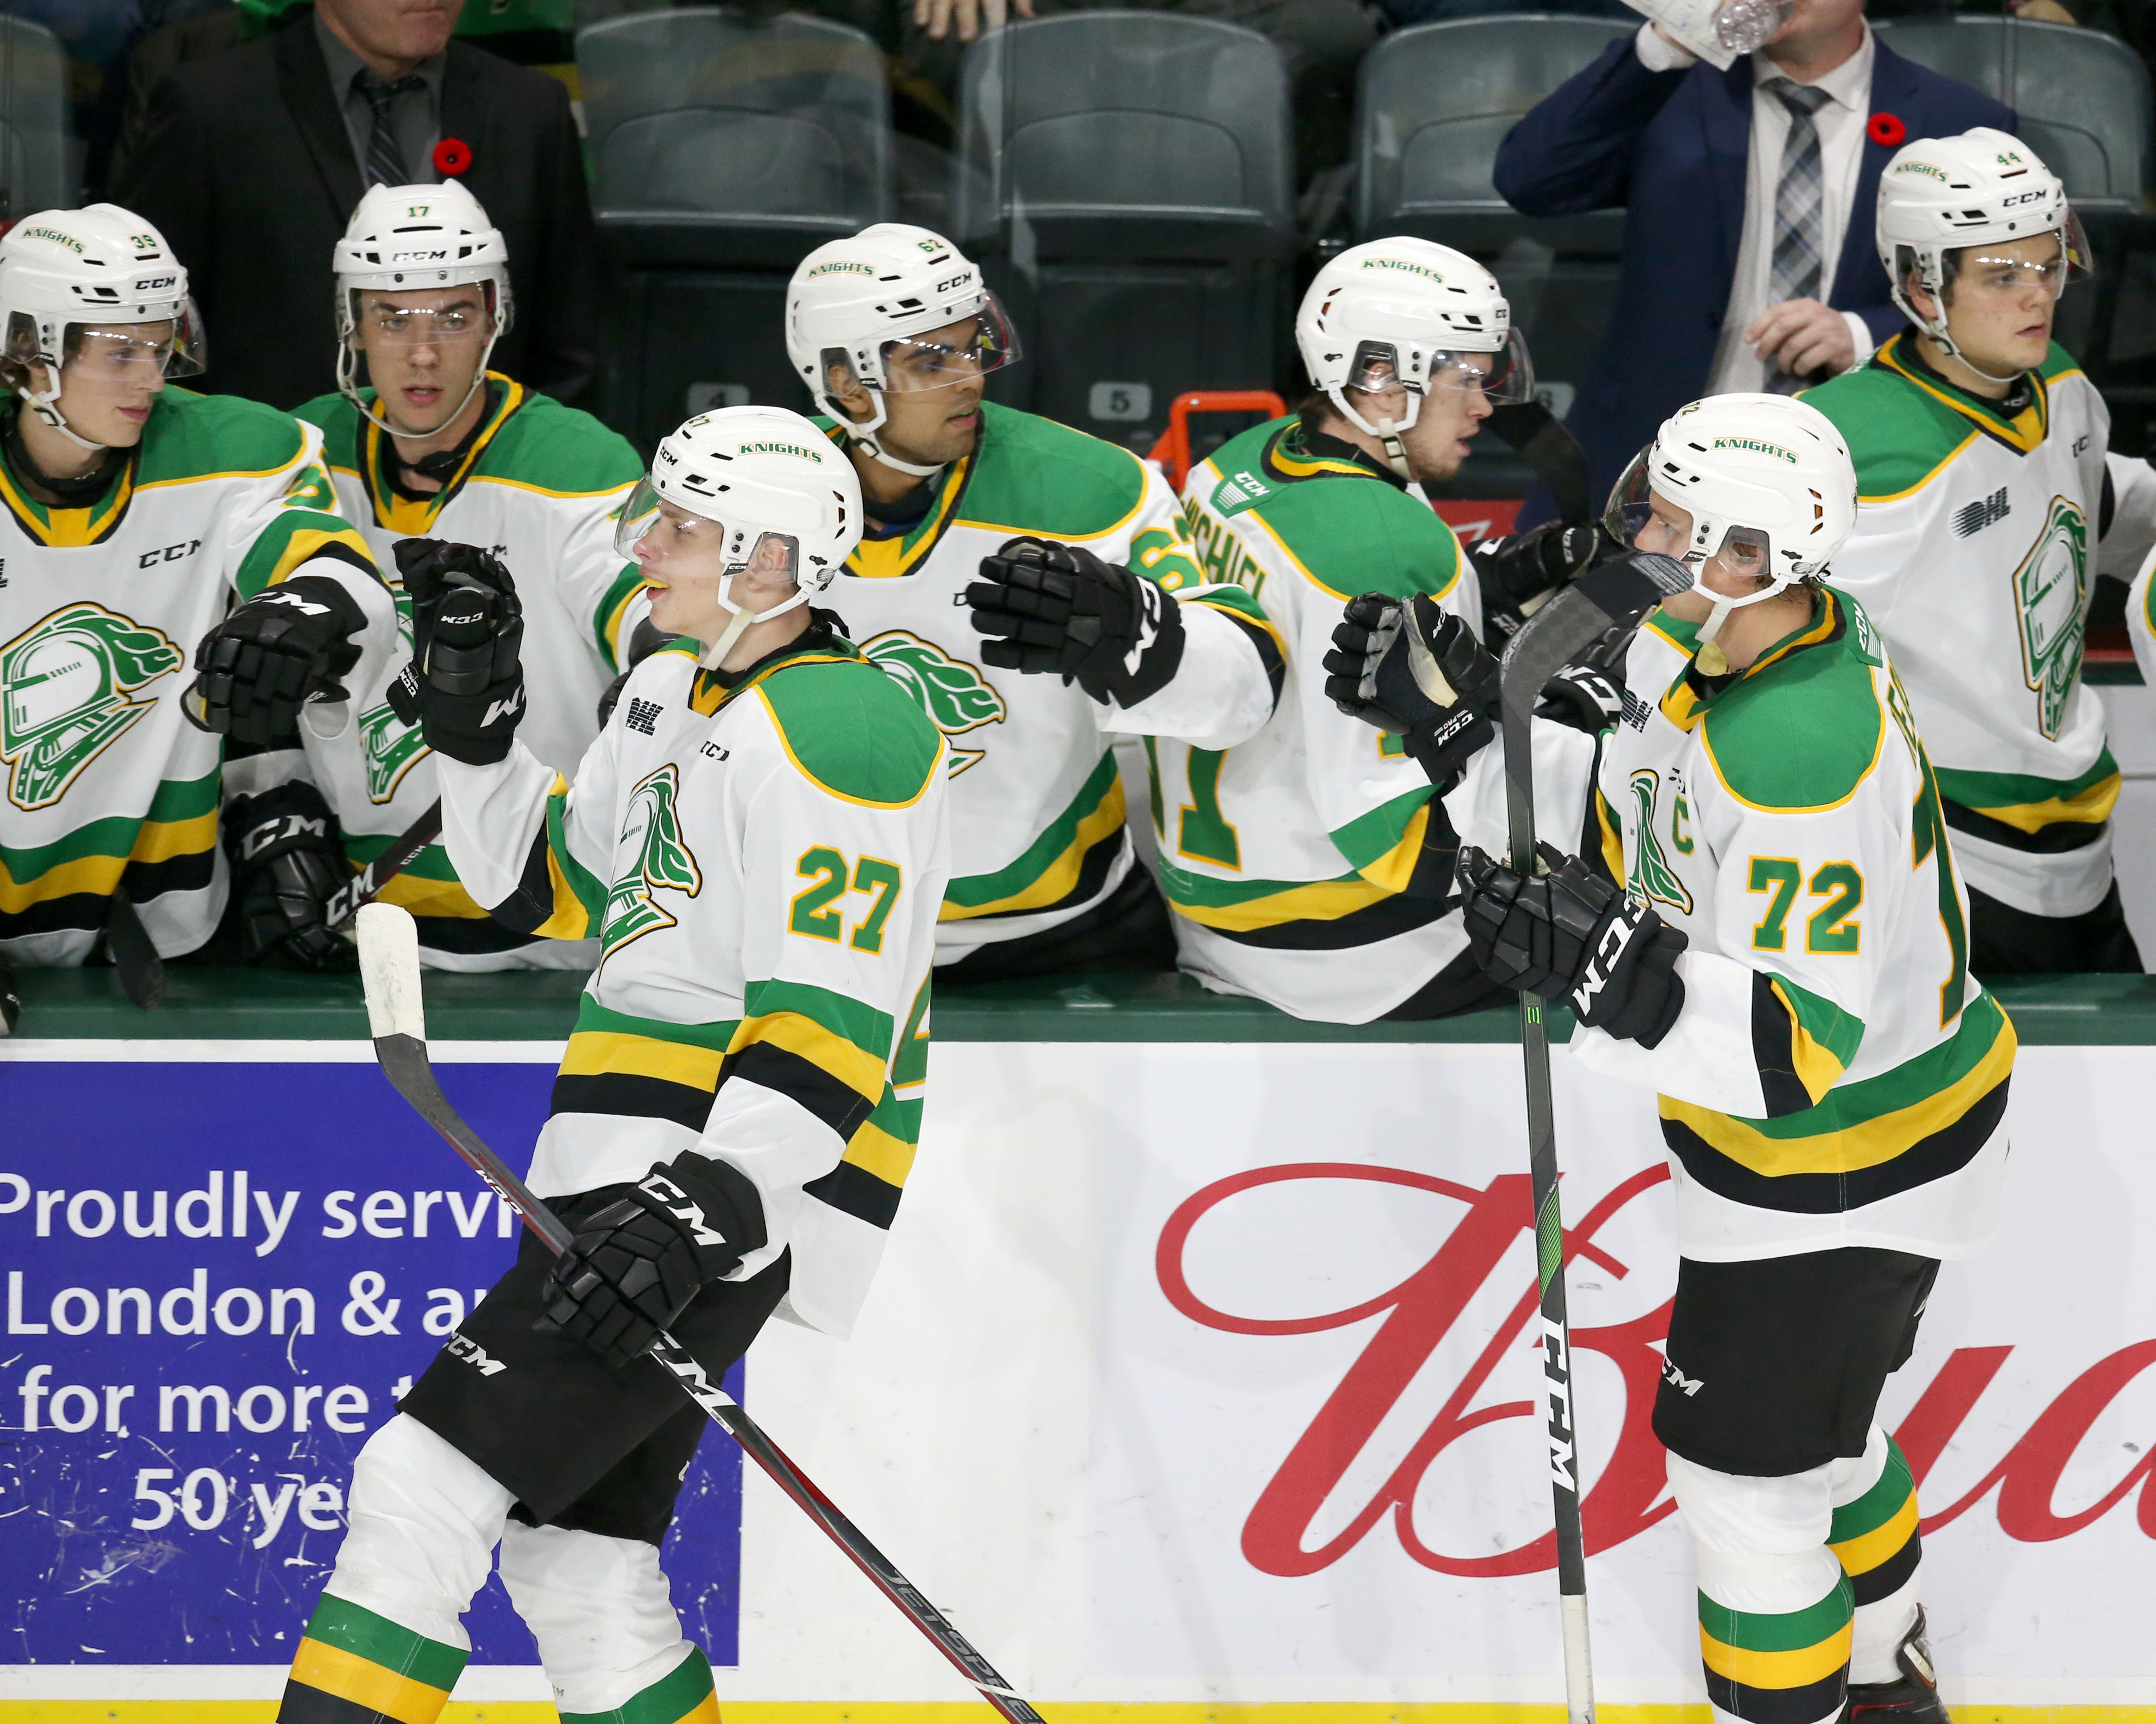 Downtown delight in the air as London Knights make regular season